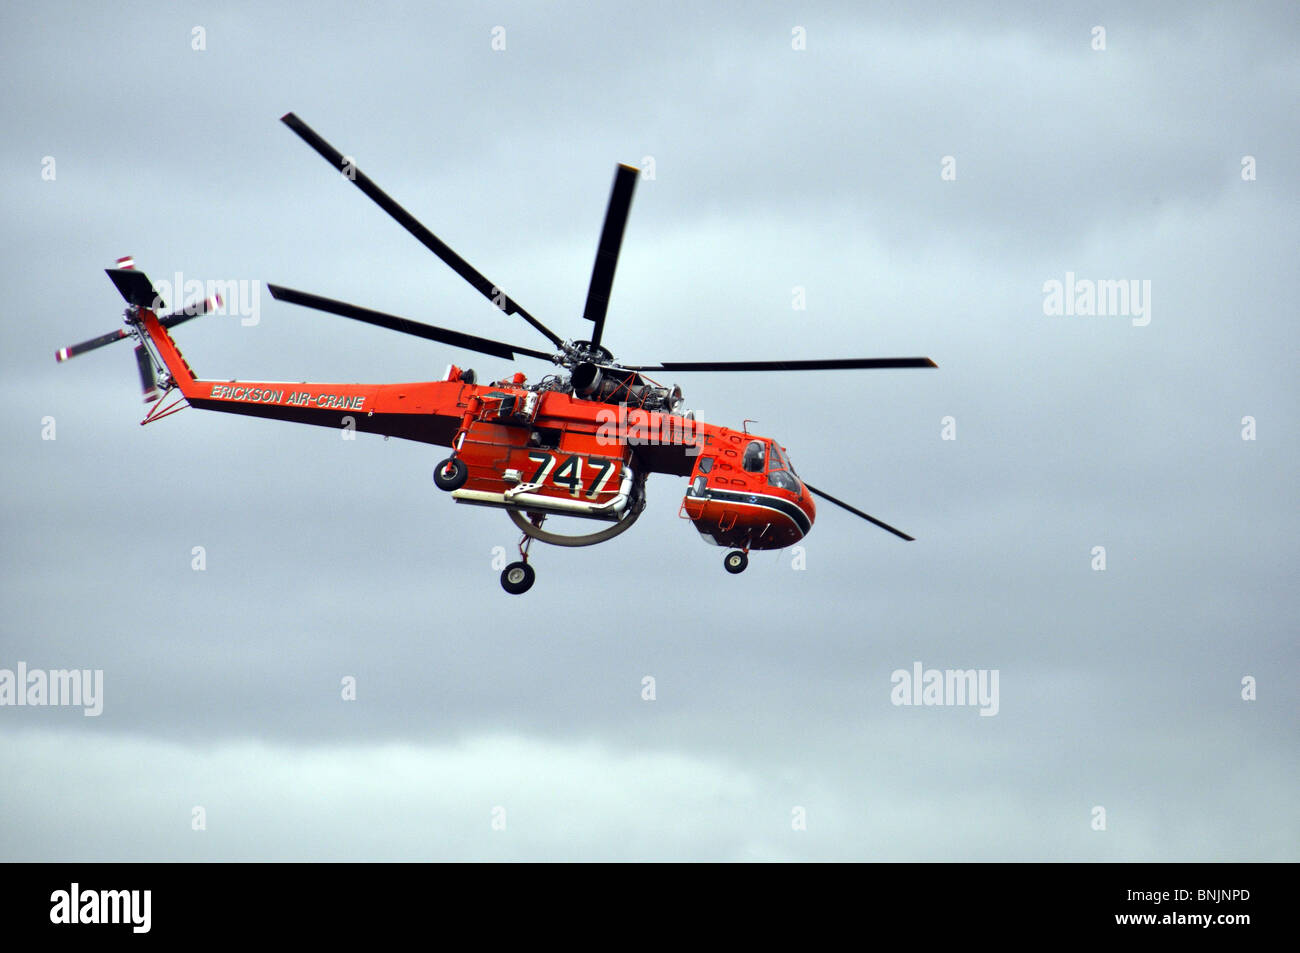 Firefighting Bushfire Fighting Water Bush Wildfire Fire Air Crane Flying Helicopter Red Stock Photo